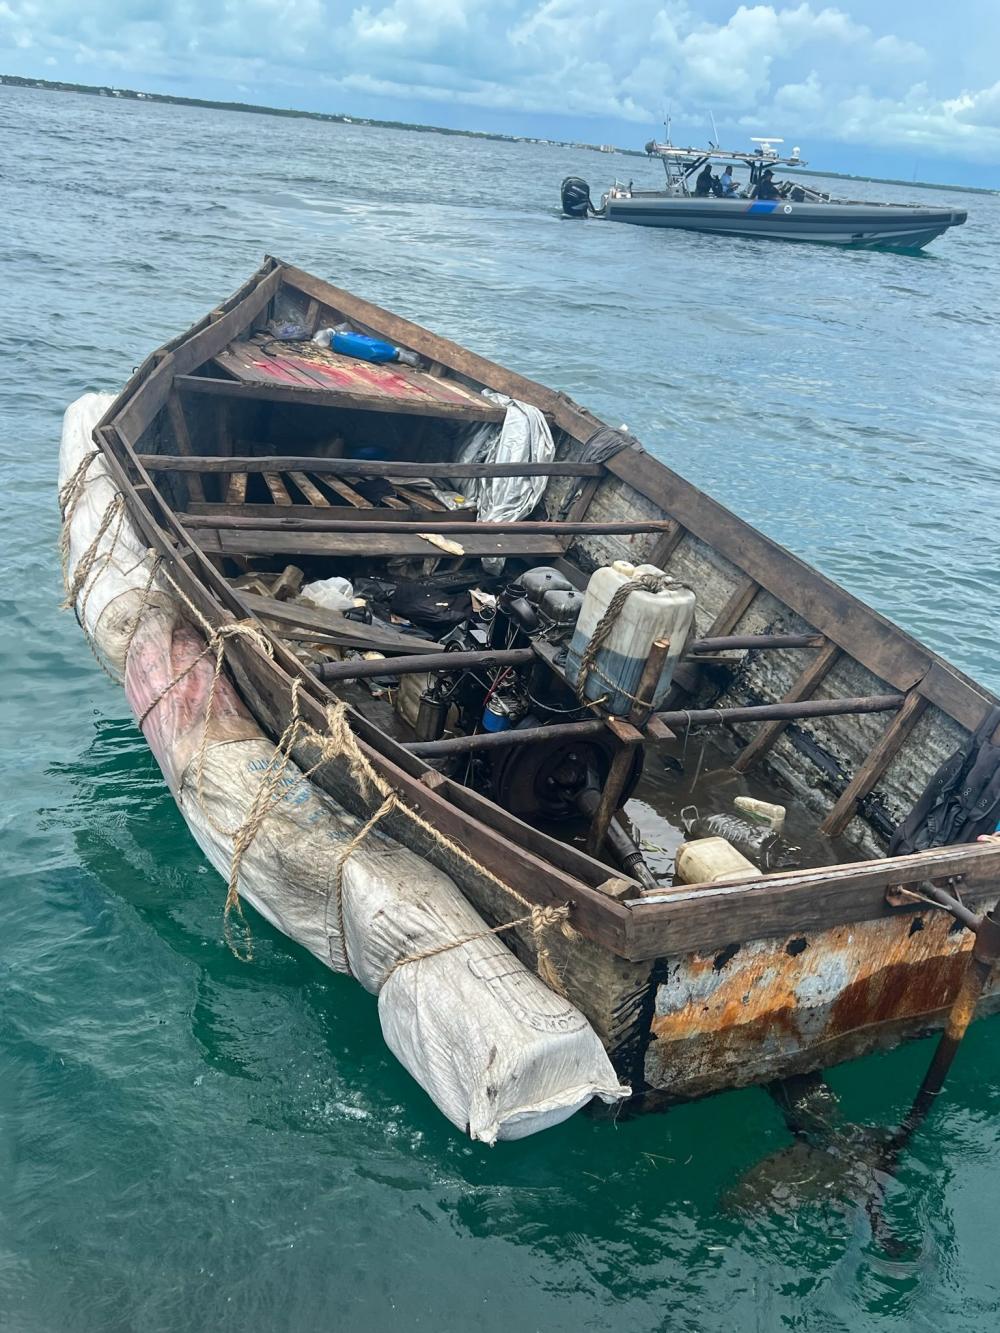 A good Samaritan notified Sector Key West watchstanders of this rustic vessel about 3 miles south of Snake Creek, Islamorada, Florida, Sept. 8, 2022. The people were repatriated to Cuba Sept. 11, 2022. The people were repatriated to Cuba on Sept. 11, 2022. (U.S. Coast Guard photo)